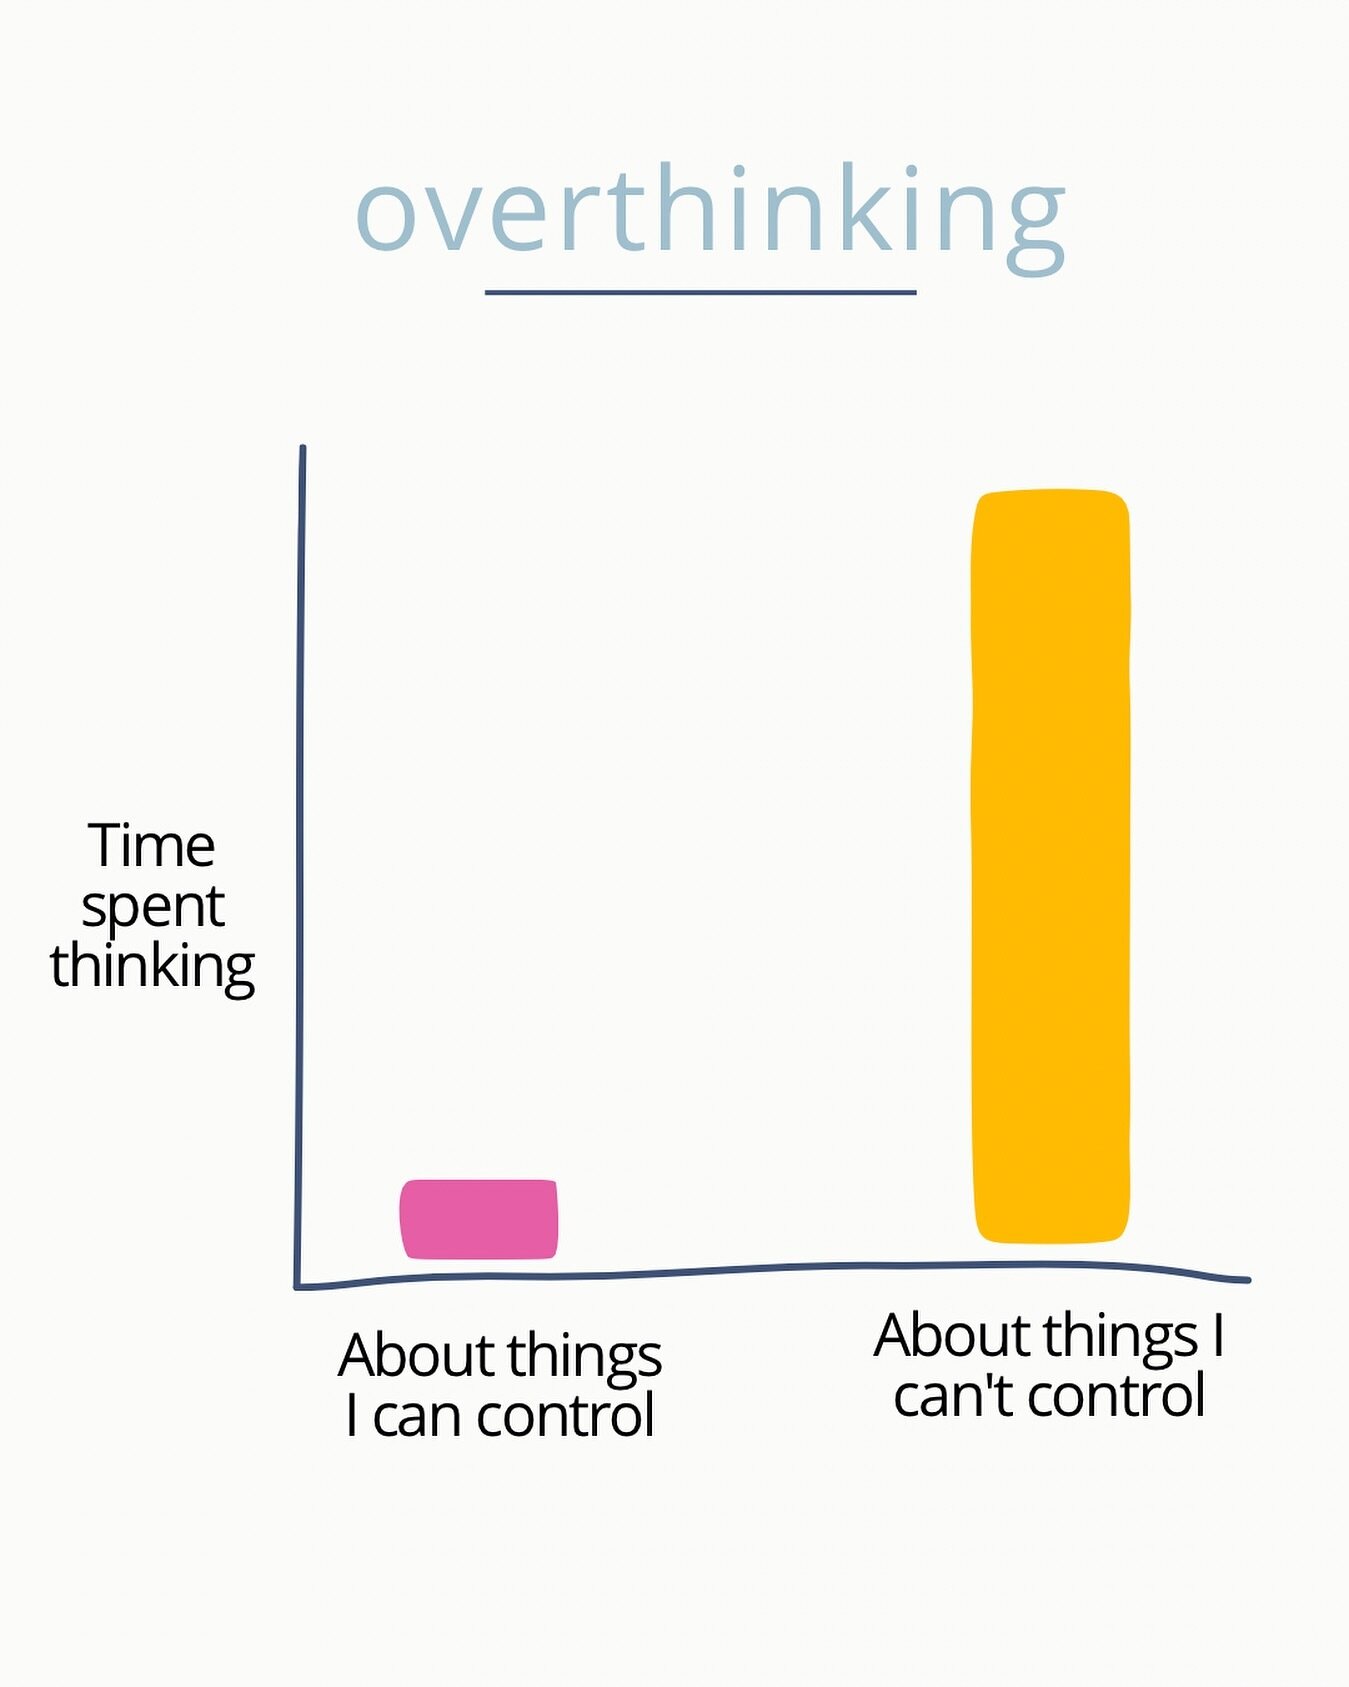 Over thinking is the process of thinking about things you can&rsquo;t control for most of your time. If you find yourself in a worry loop. Pause and remind yourself of what you can control vs what your can&rsquo;t control then do a worry exercise. &b